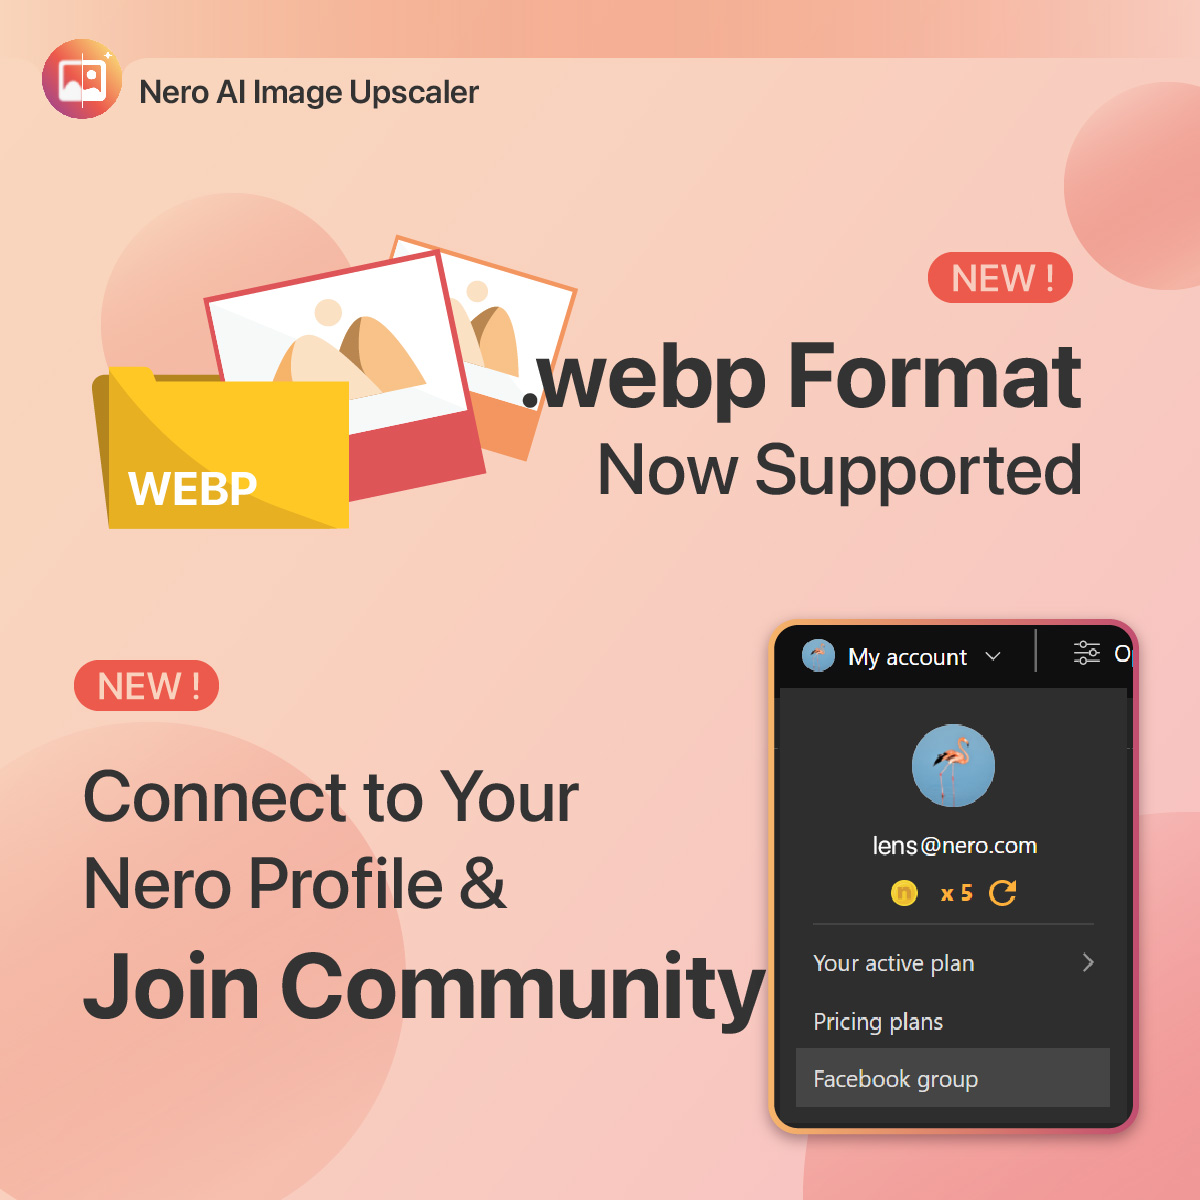 new features for nero ai image upscaler 2024-webp format, community